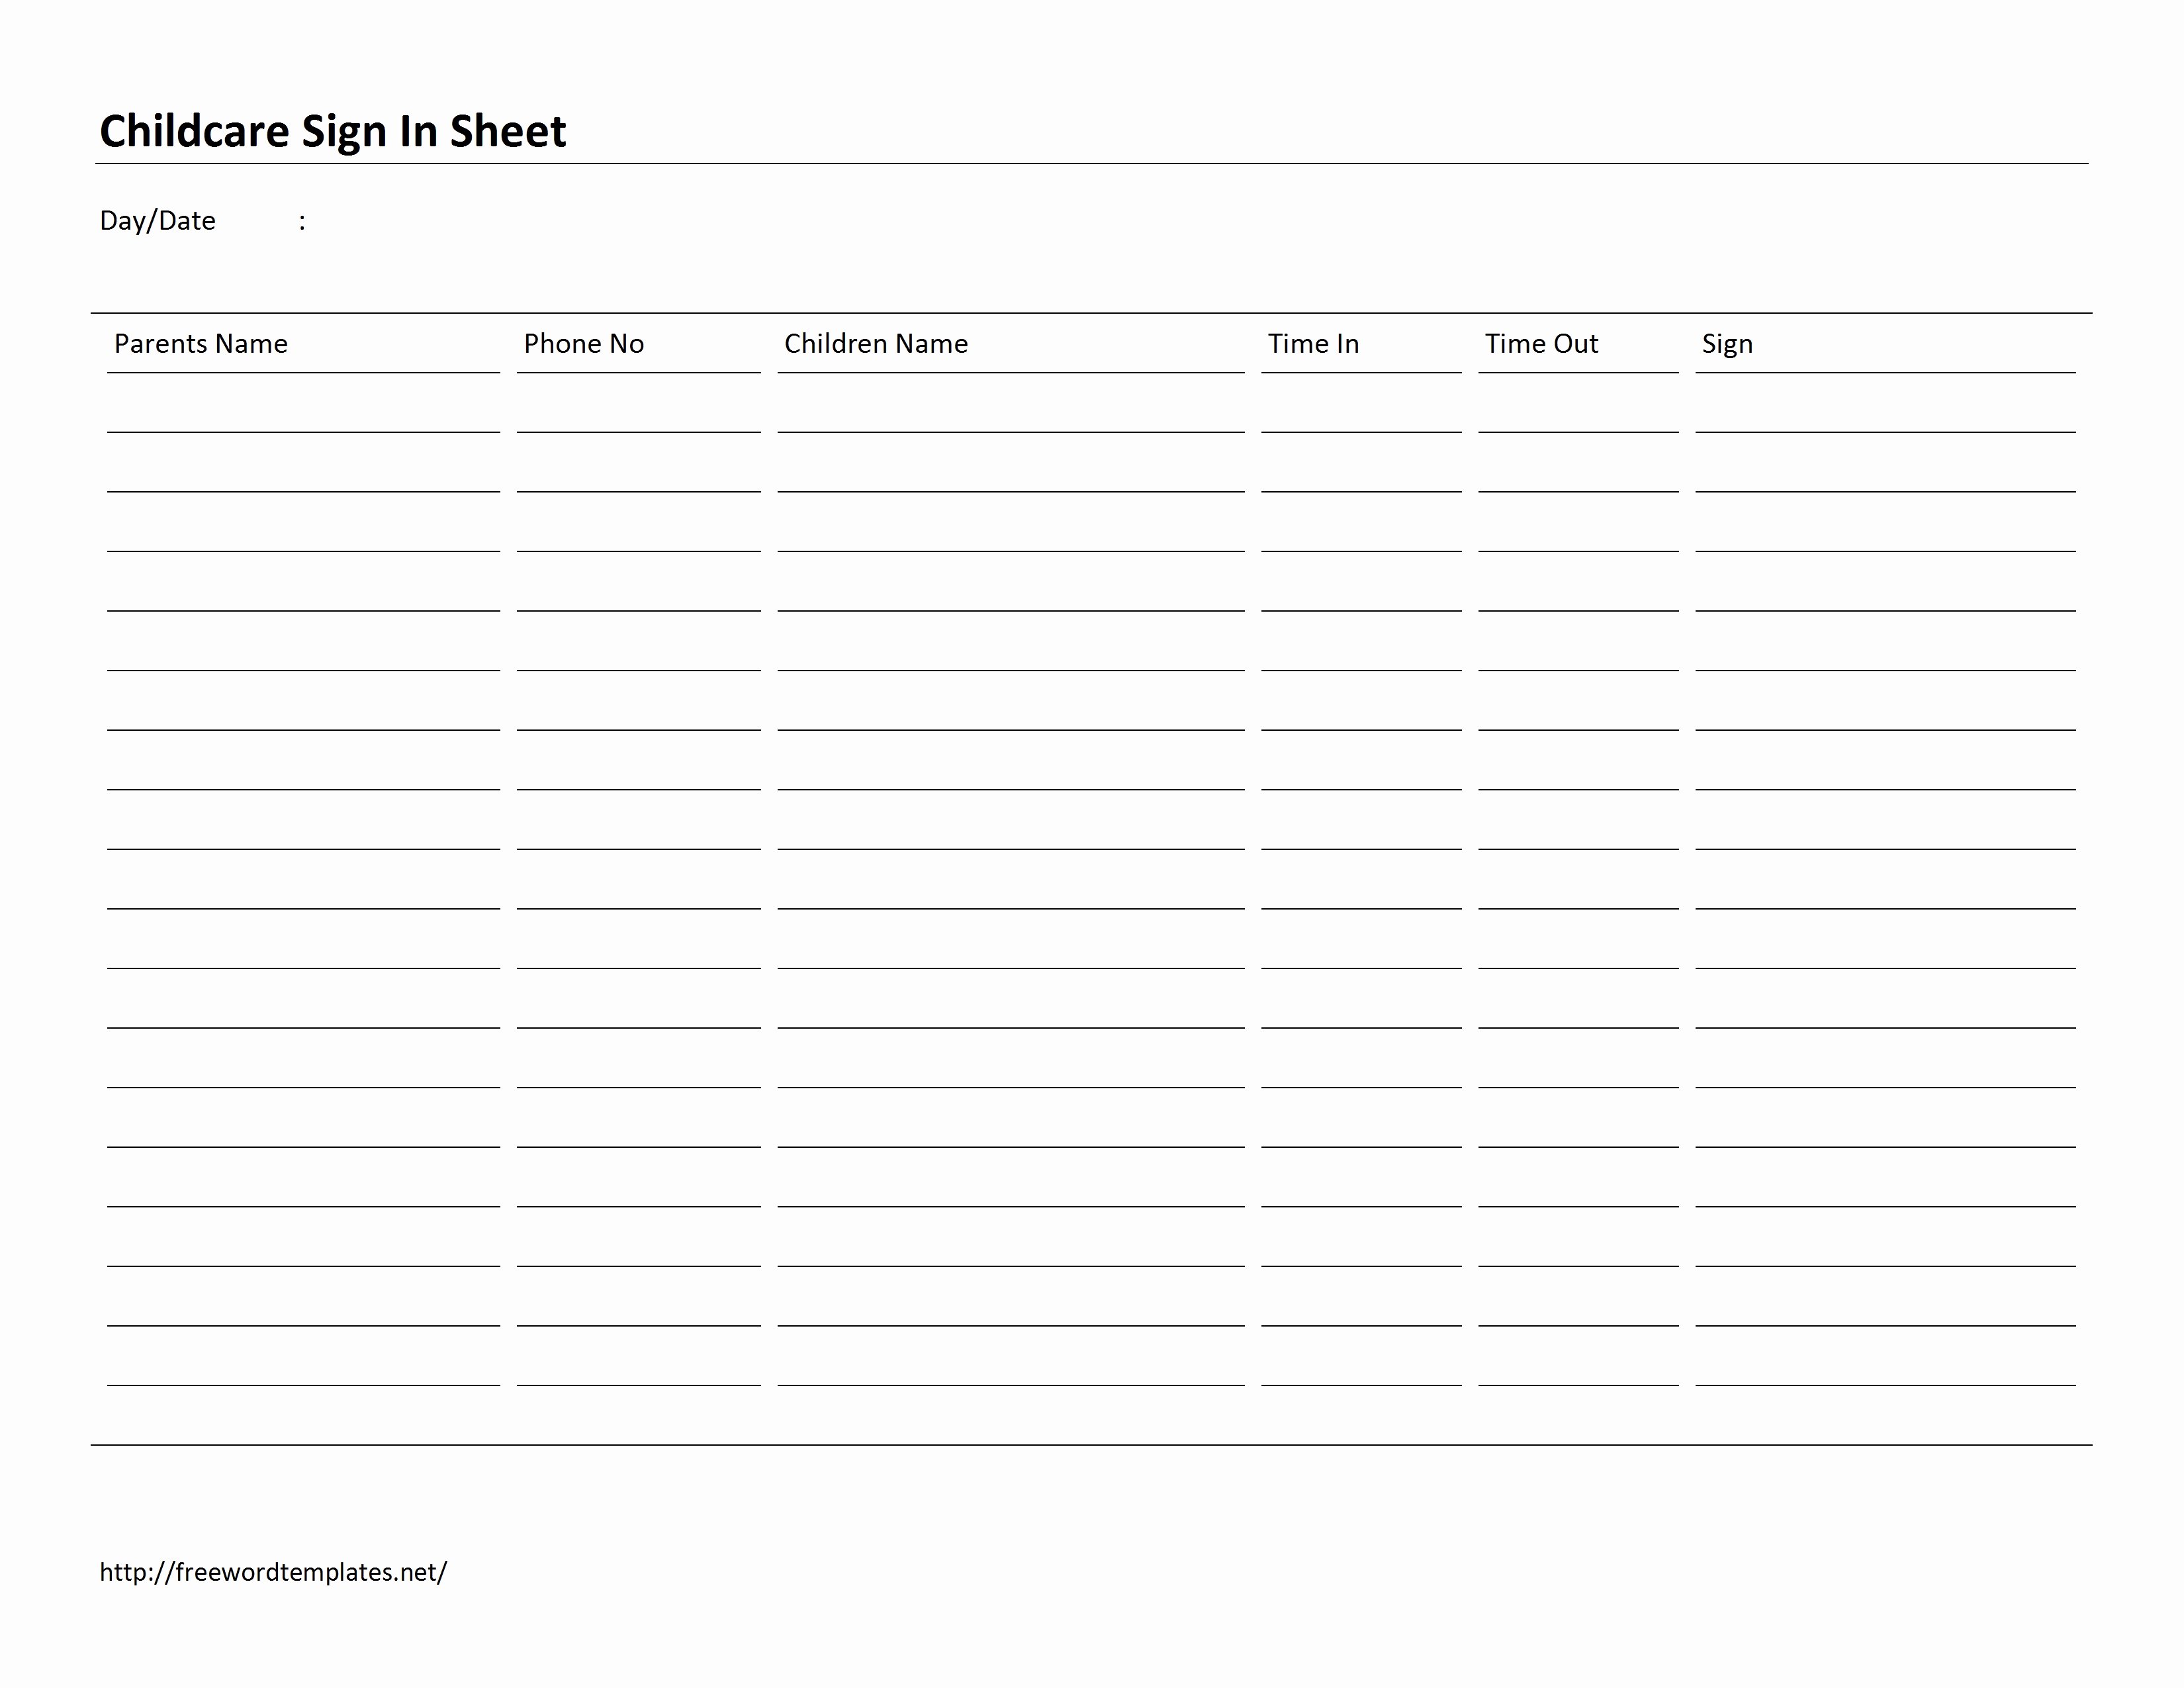 Sign In Sheet Template Word Luxury Childcare Sign In Sheet Template